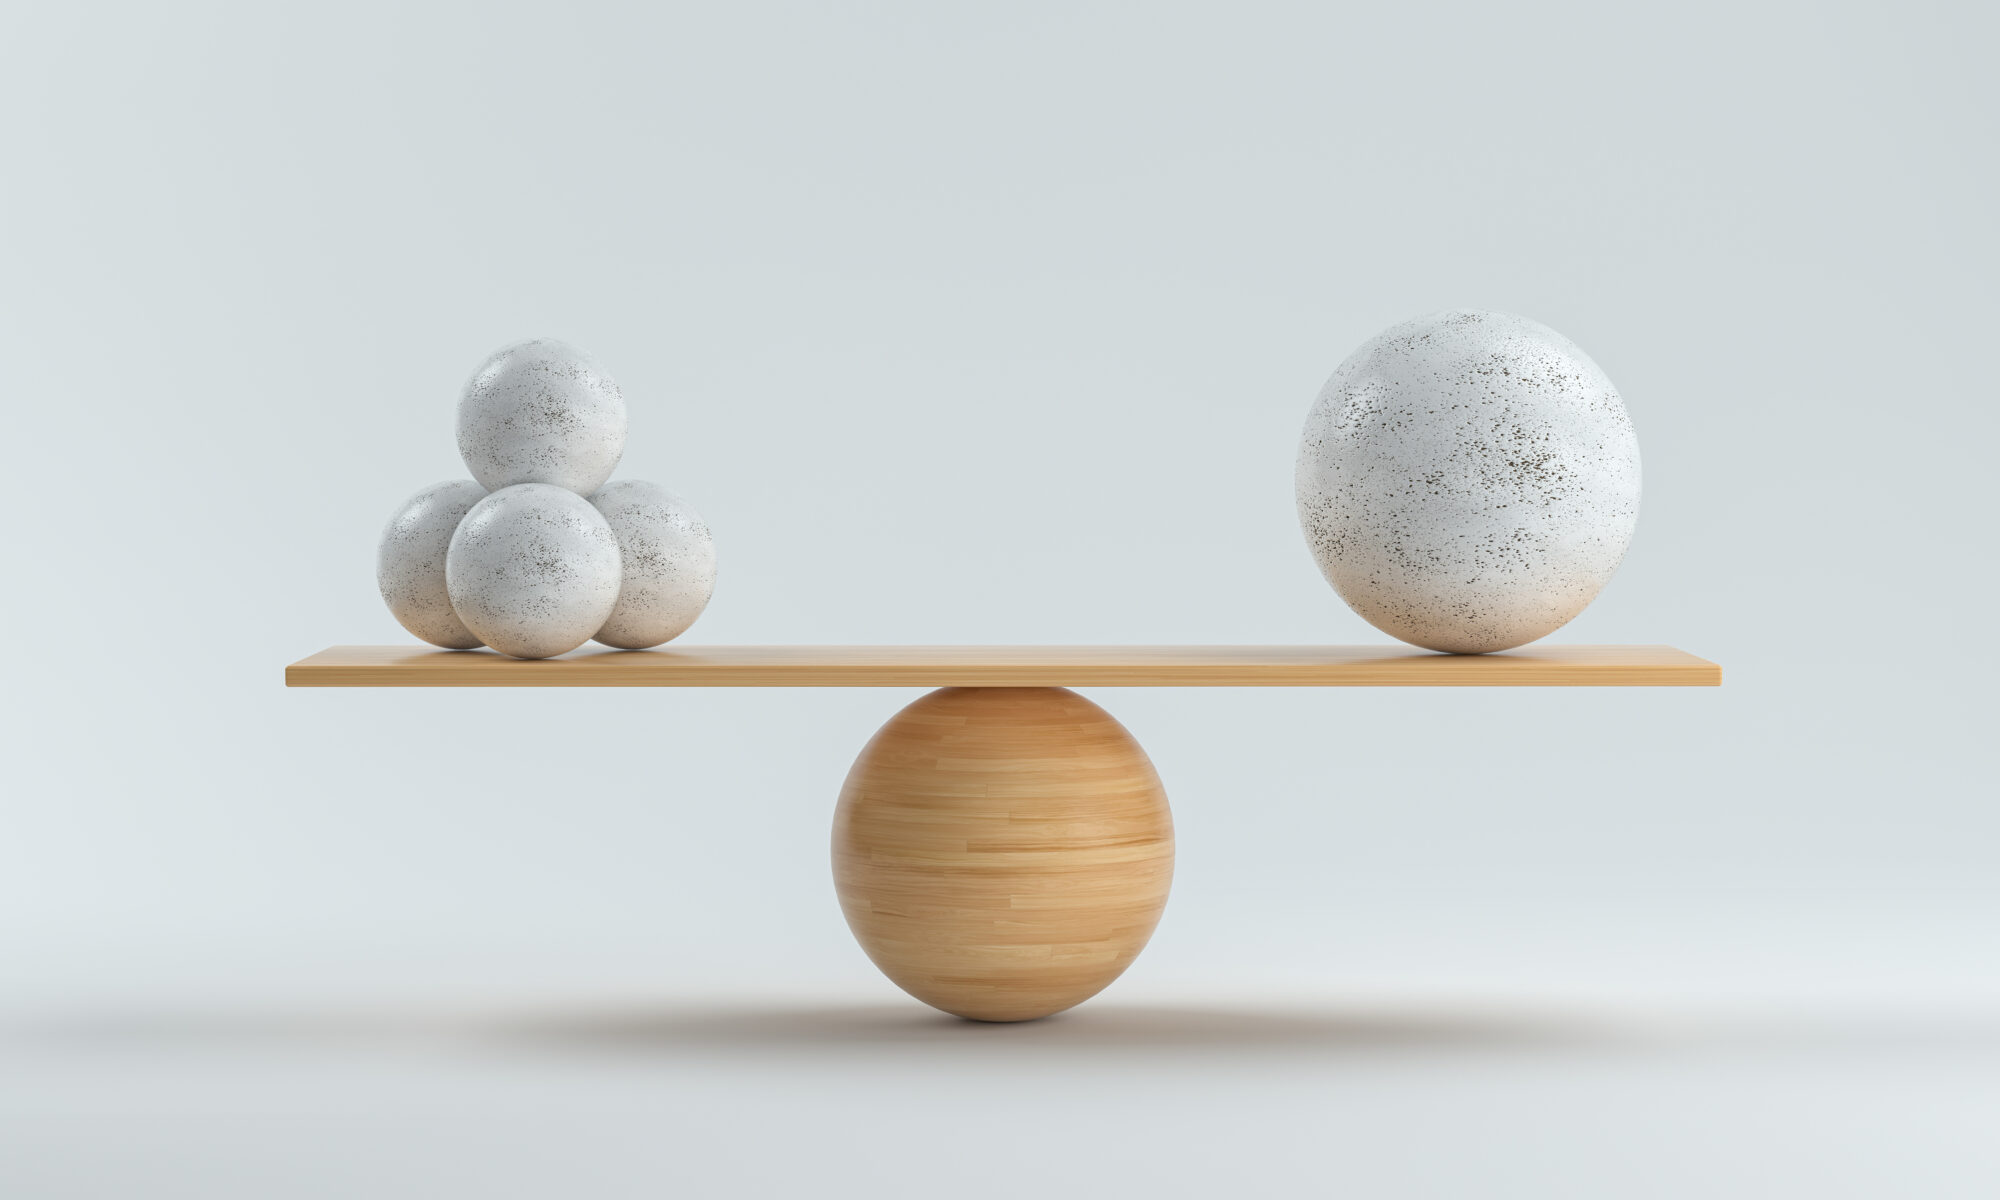 wooden scale balancing one big ball and four small ones